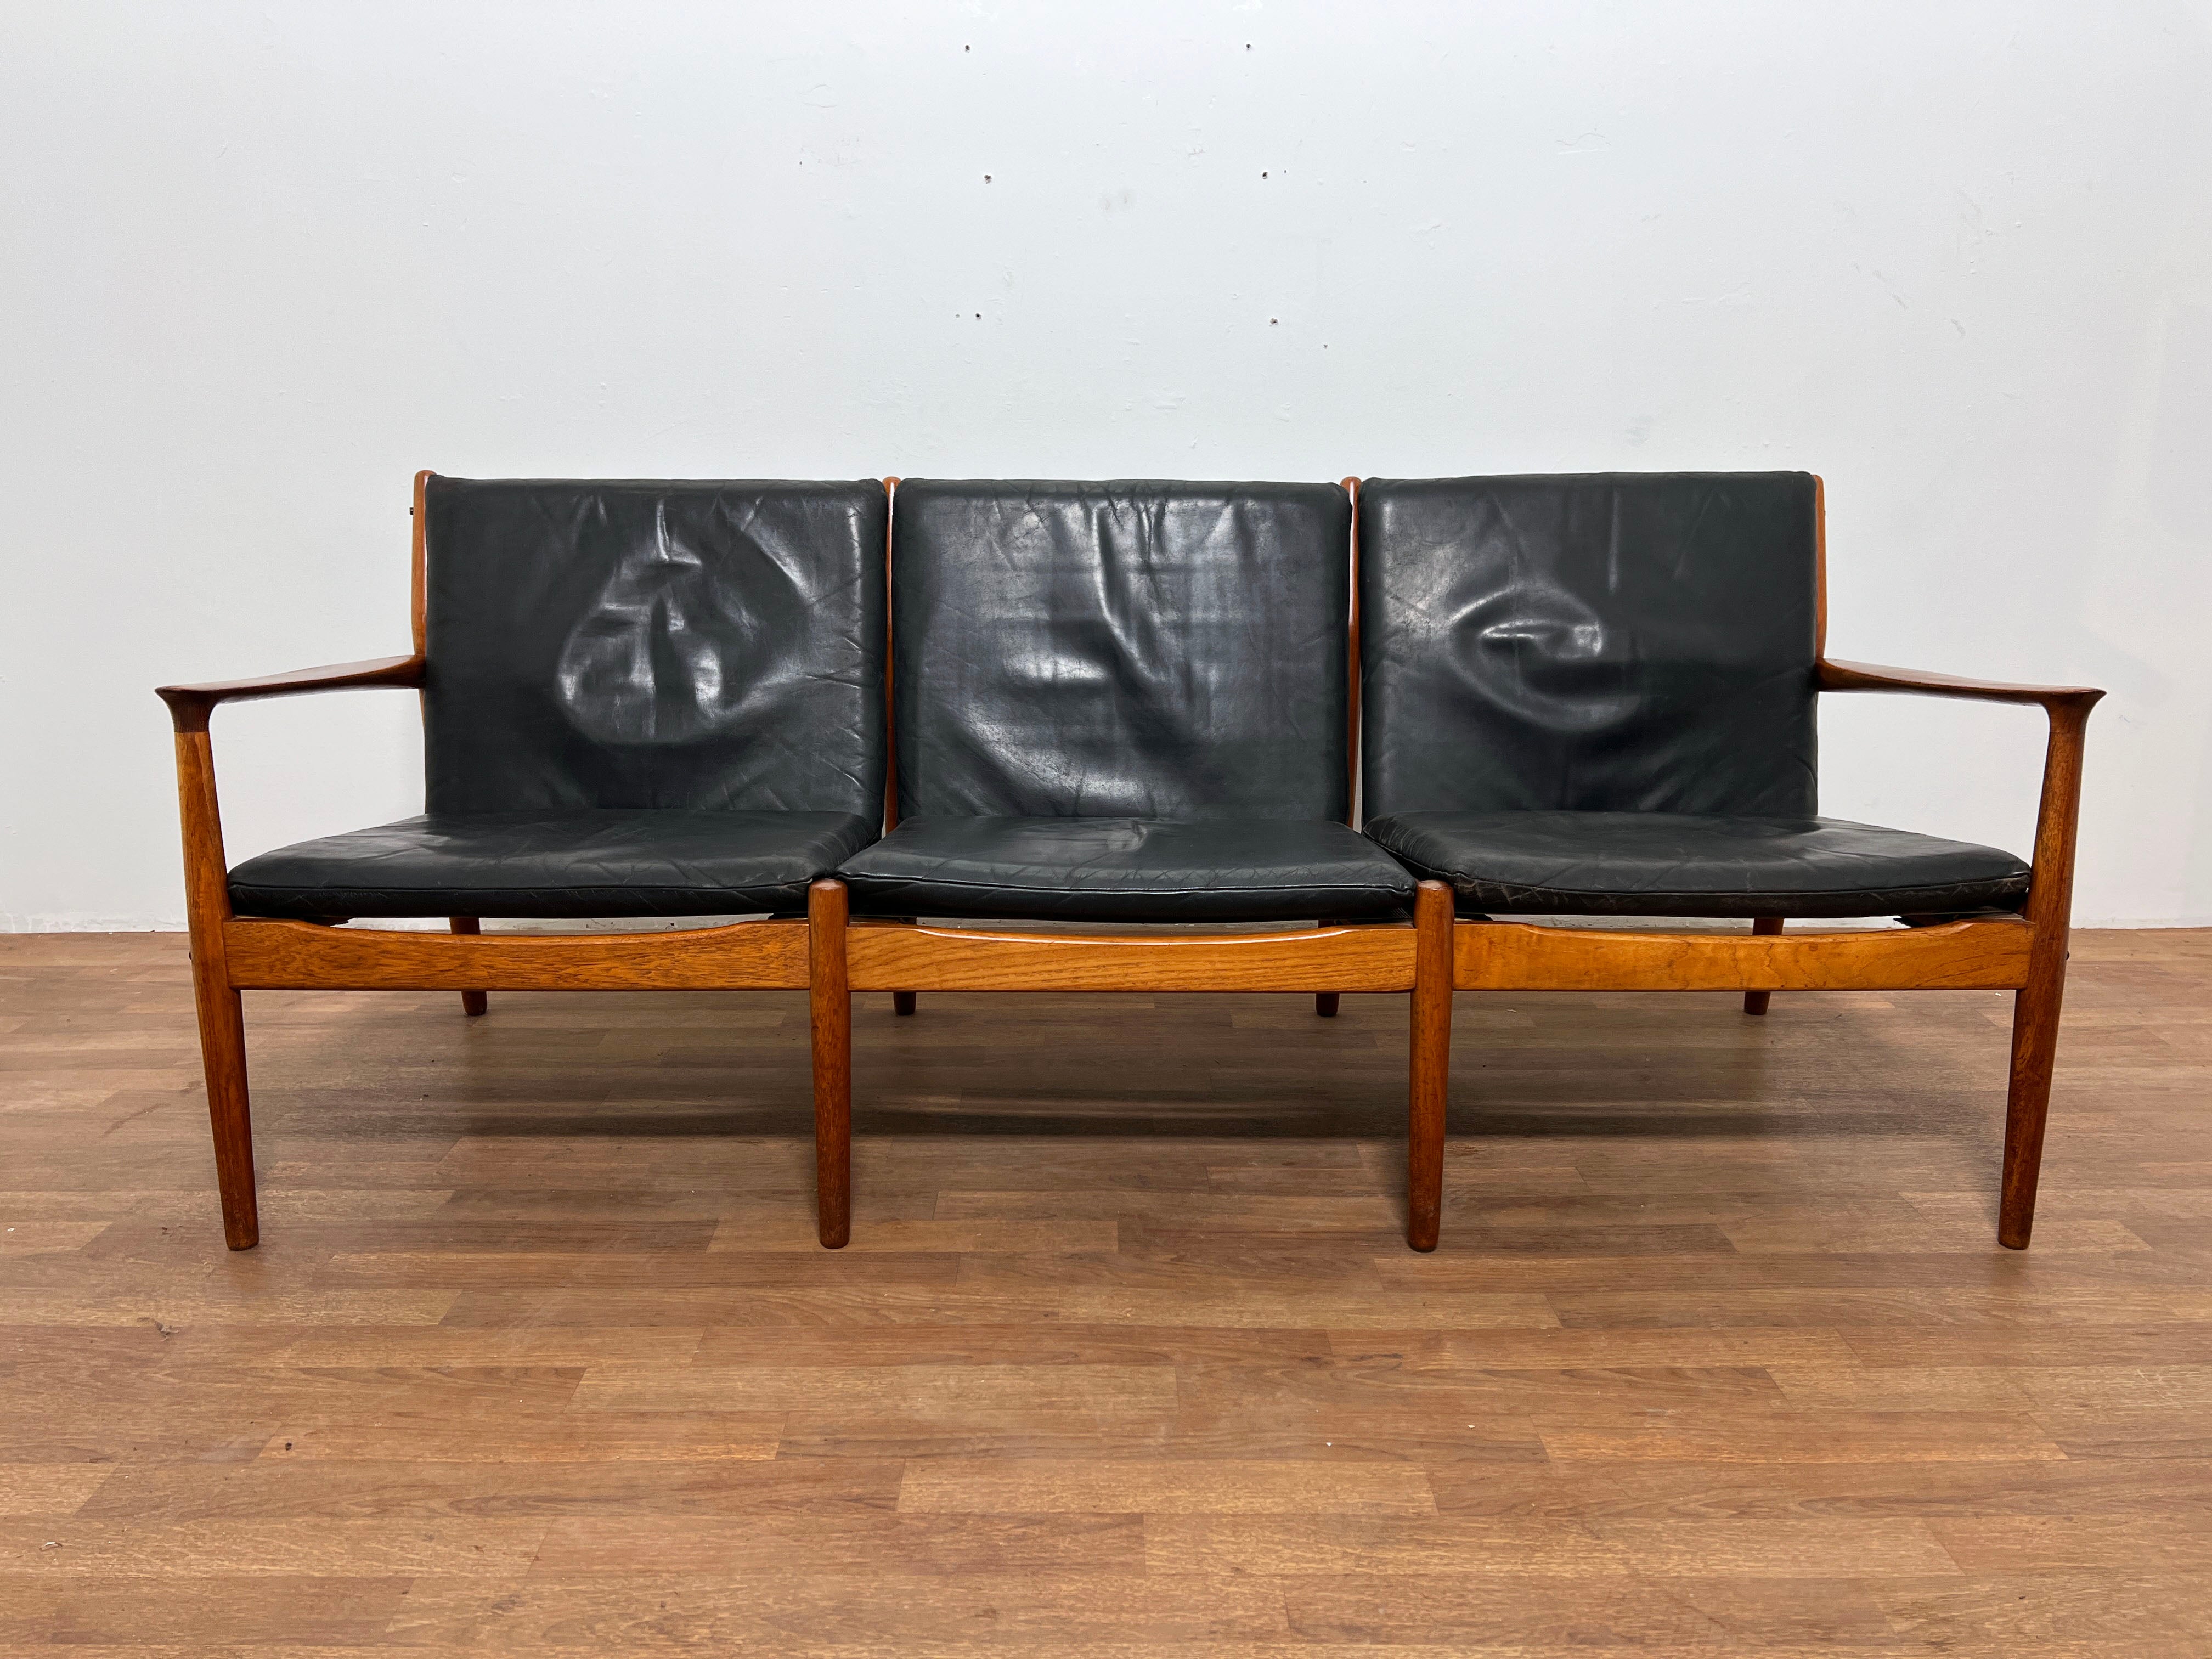 A Danish teak three seat sofa in original soft leather upholstery, designed by Svend Aage Eriksen for Glostrup Mobelfabrik, in the manner of Grete Jalk, who also designed for Glostrup.

A matching lounge chair is available in a separate listing.